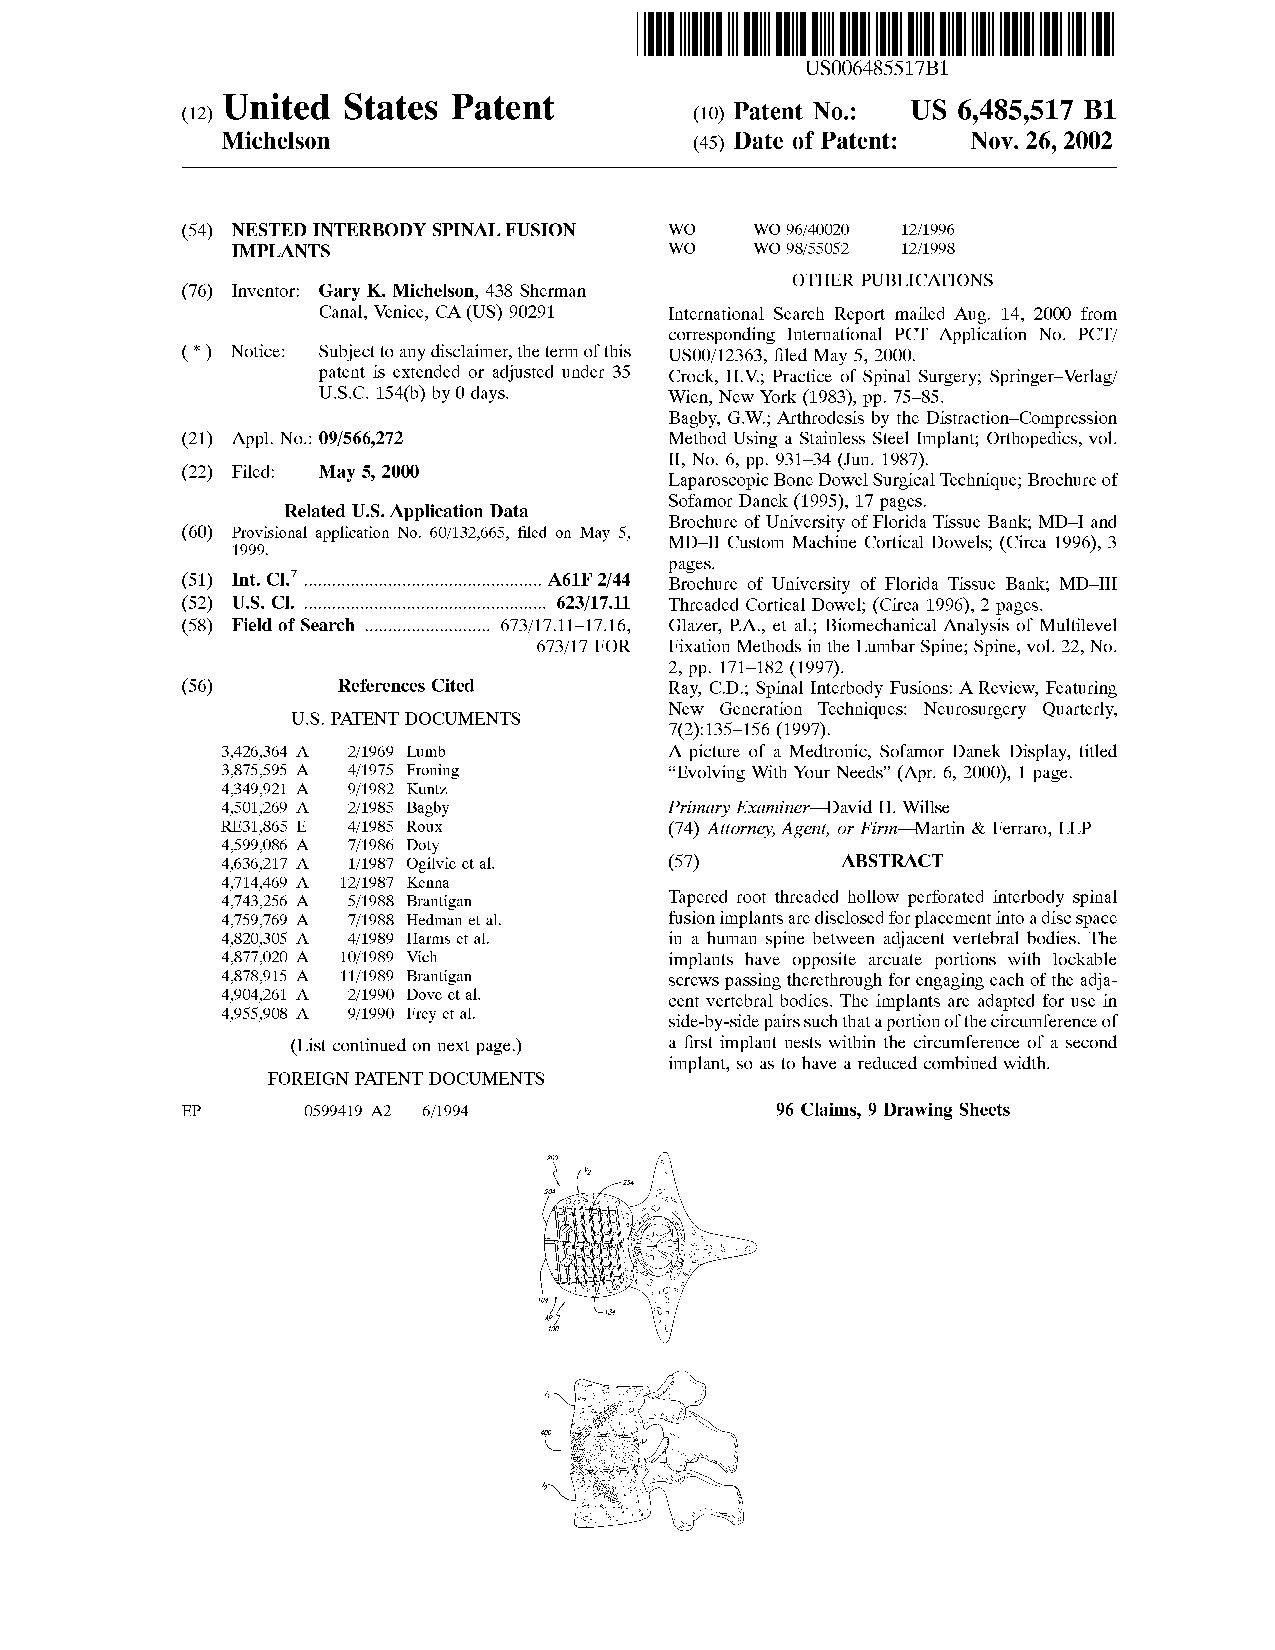 Nested interbody spinal fusion implants - Patent 6,485,517